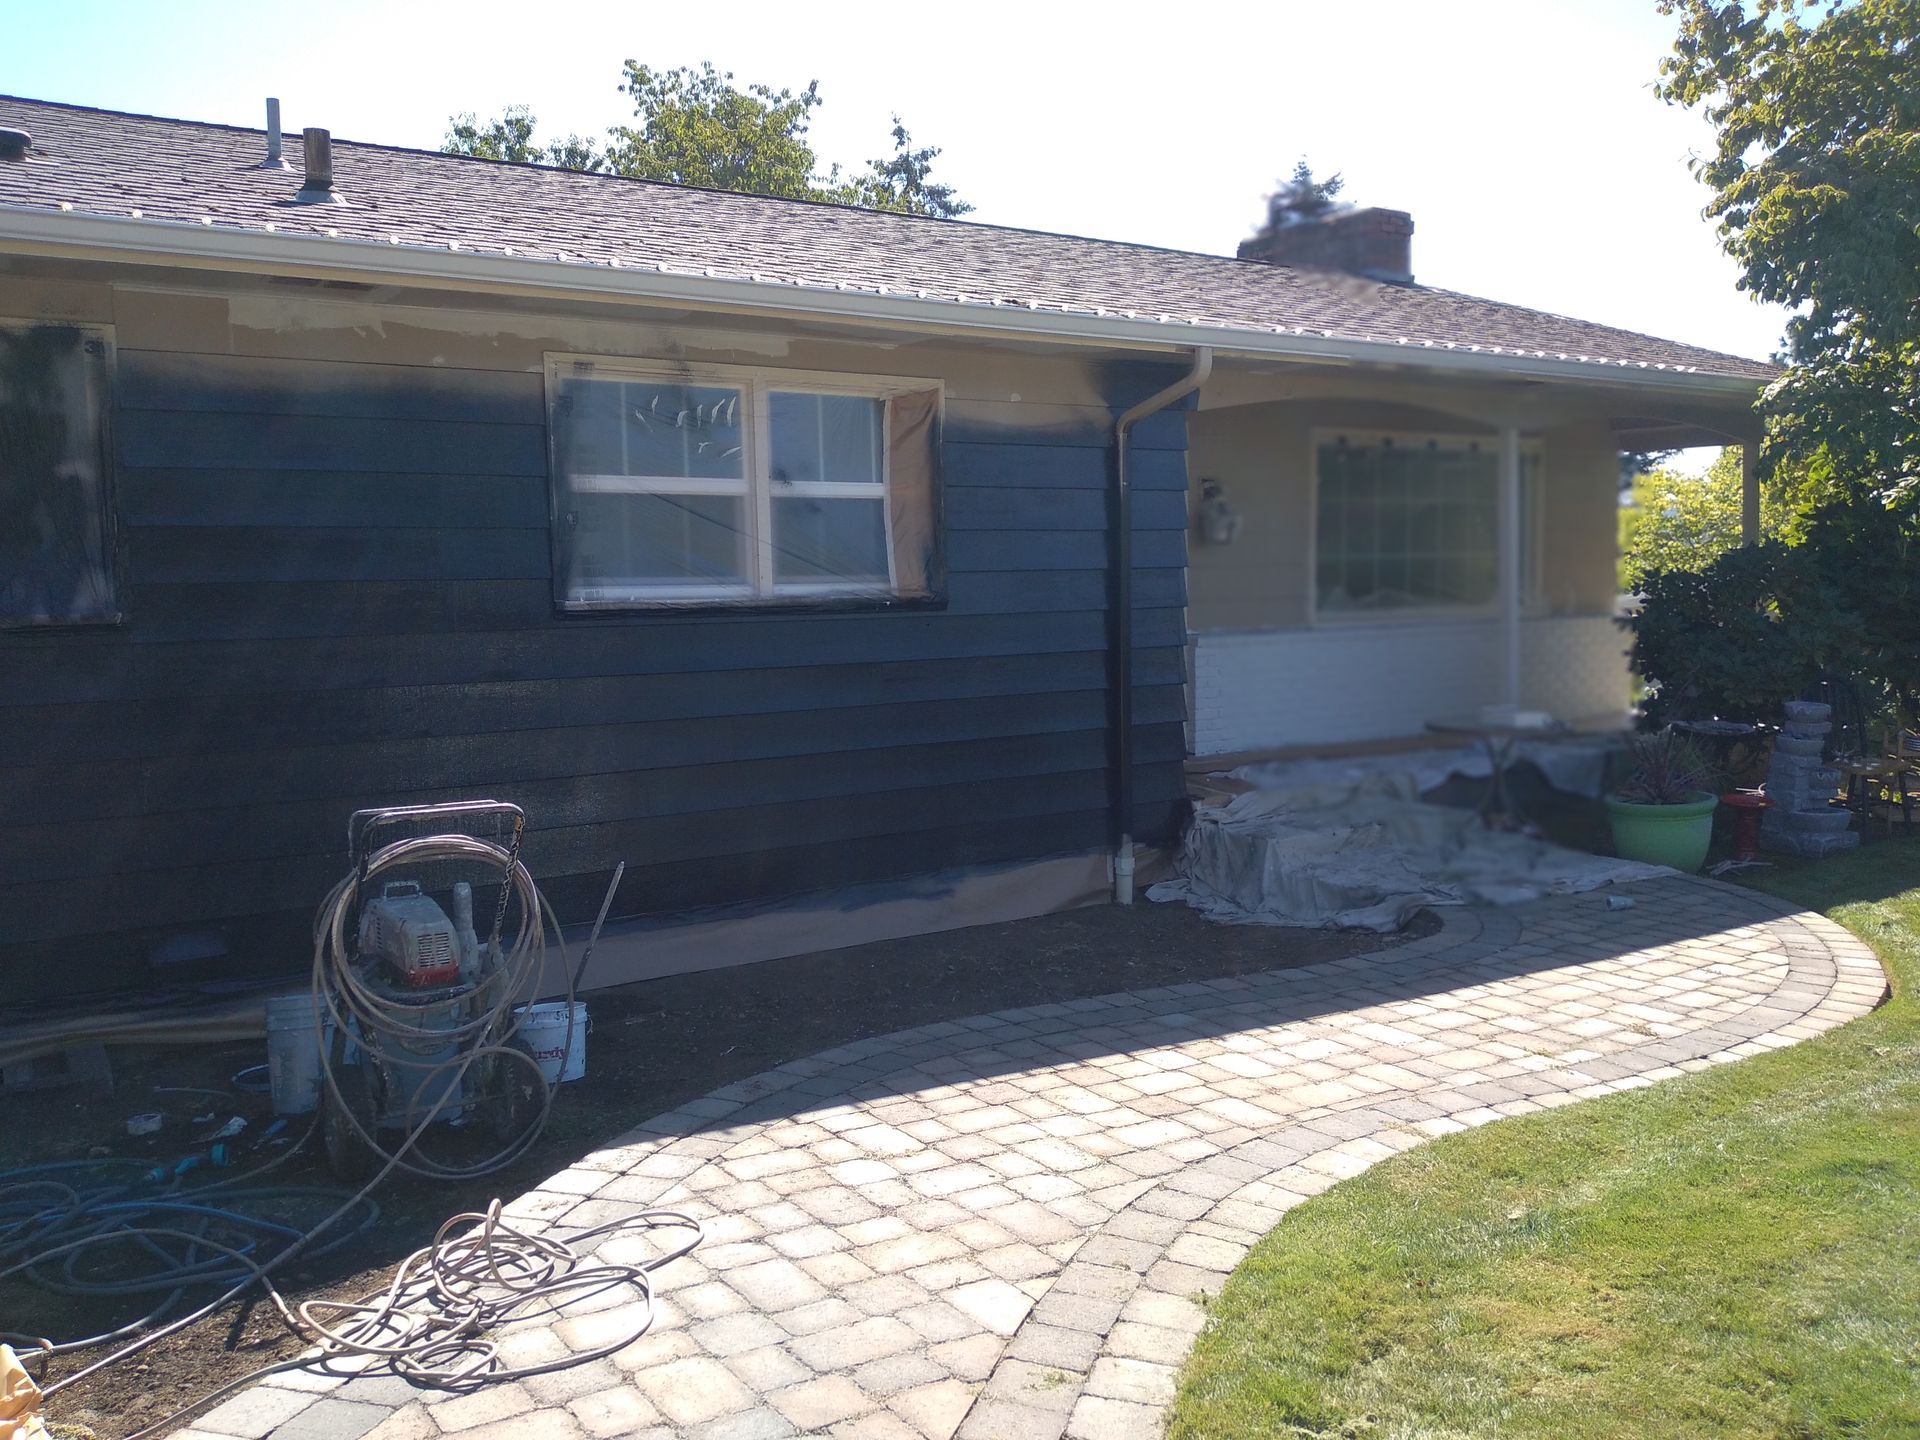 Exterior Painting | All Purpose Painting & More | Eugene, OR